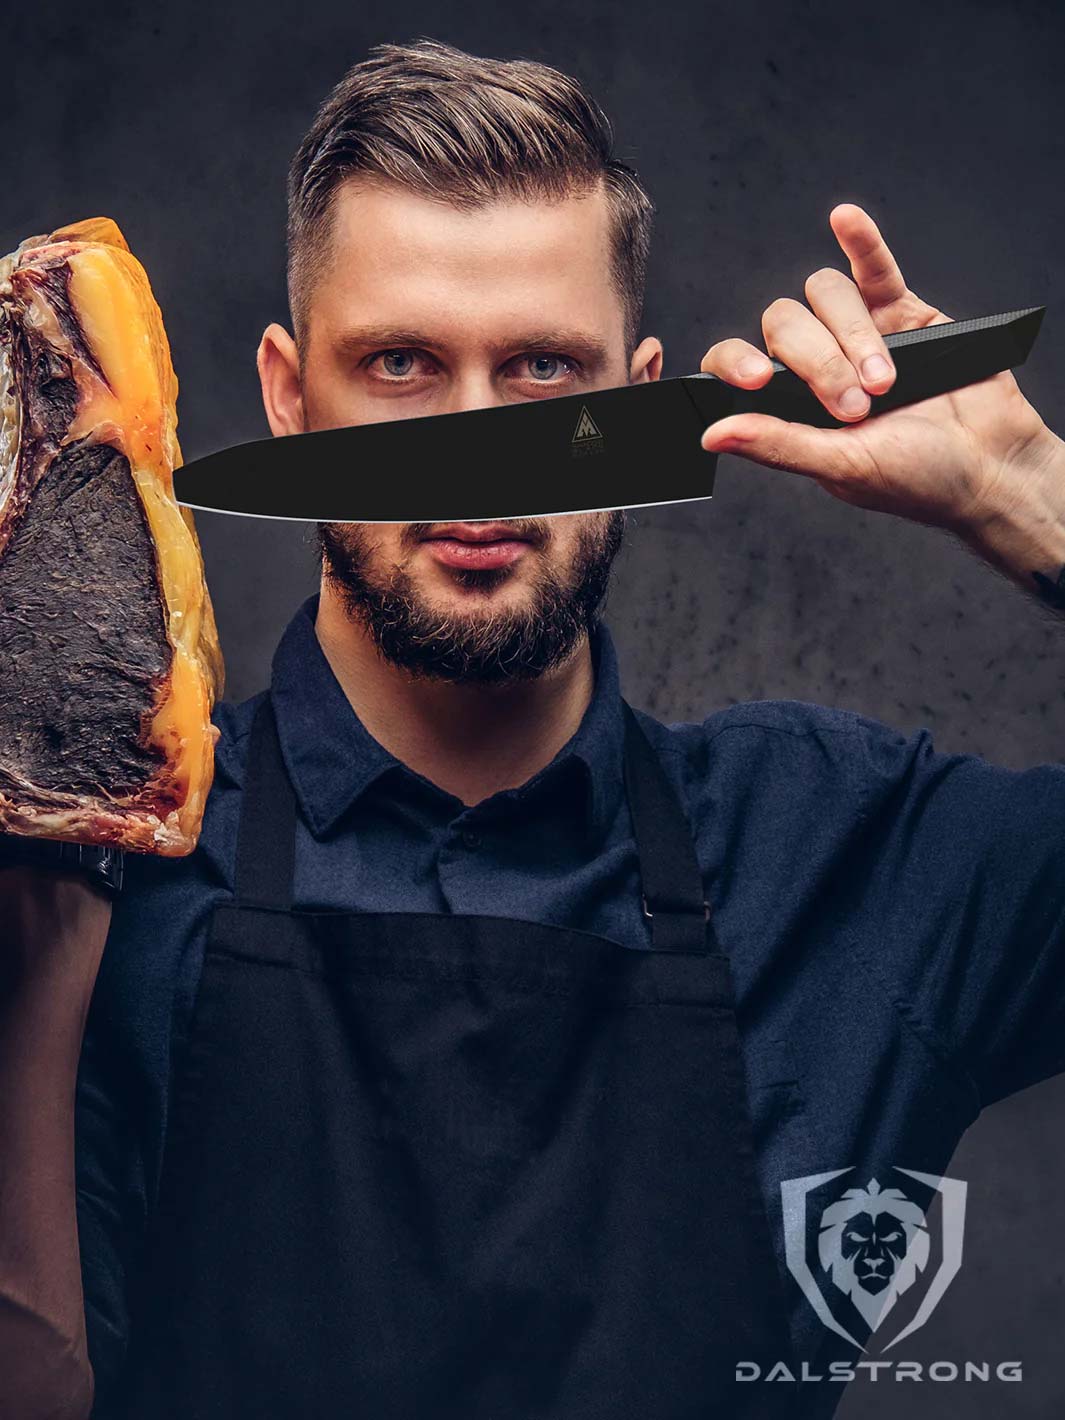 A man holding the dalstrong shadow black series 8 inch chef knife with a dry aged steak on the other hand.